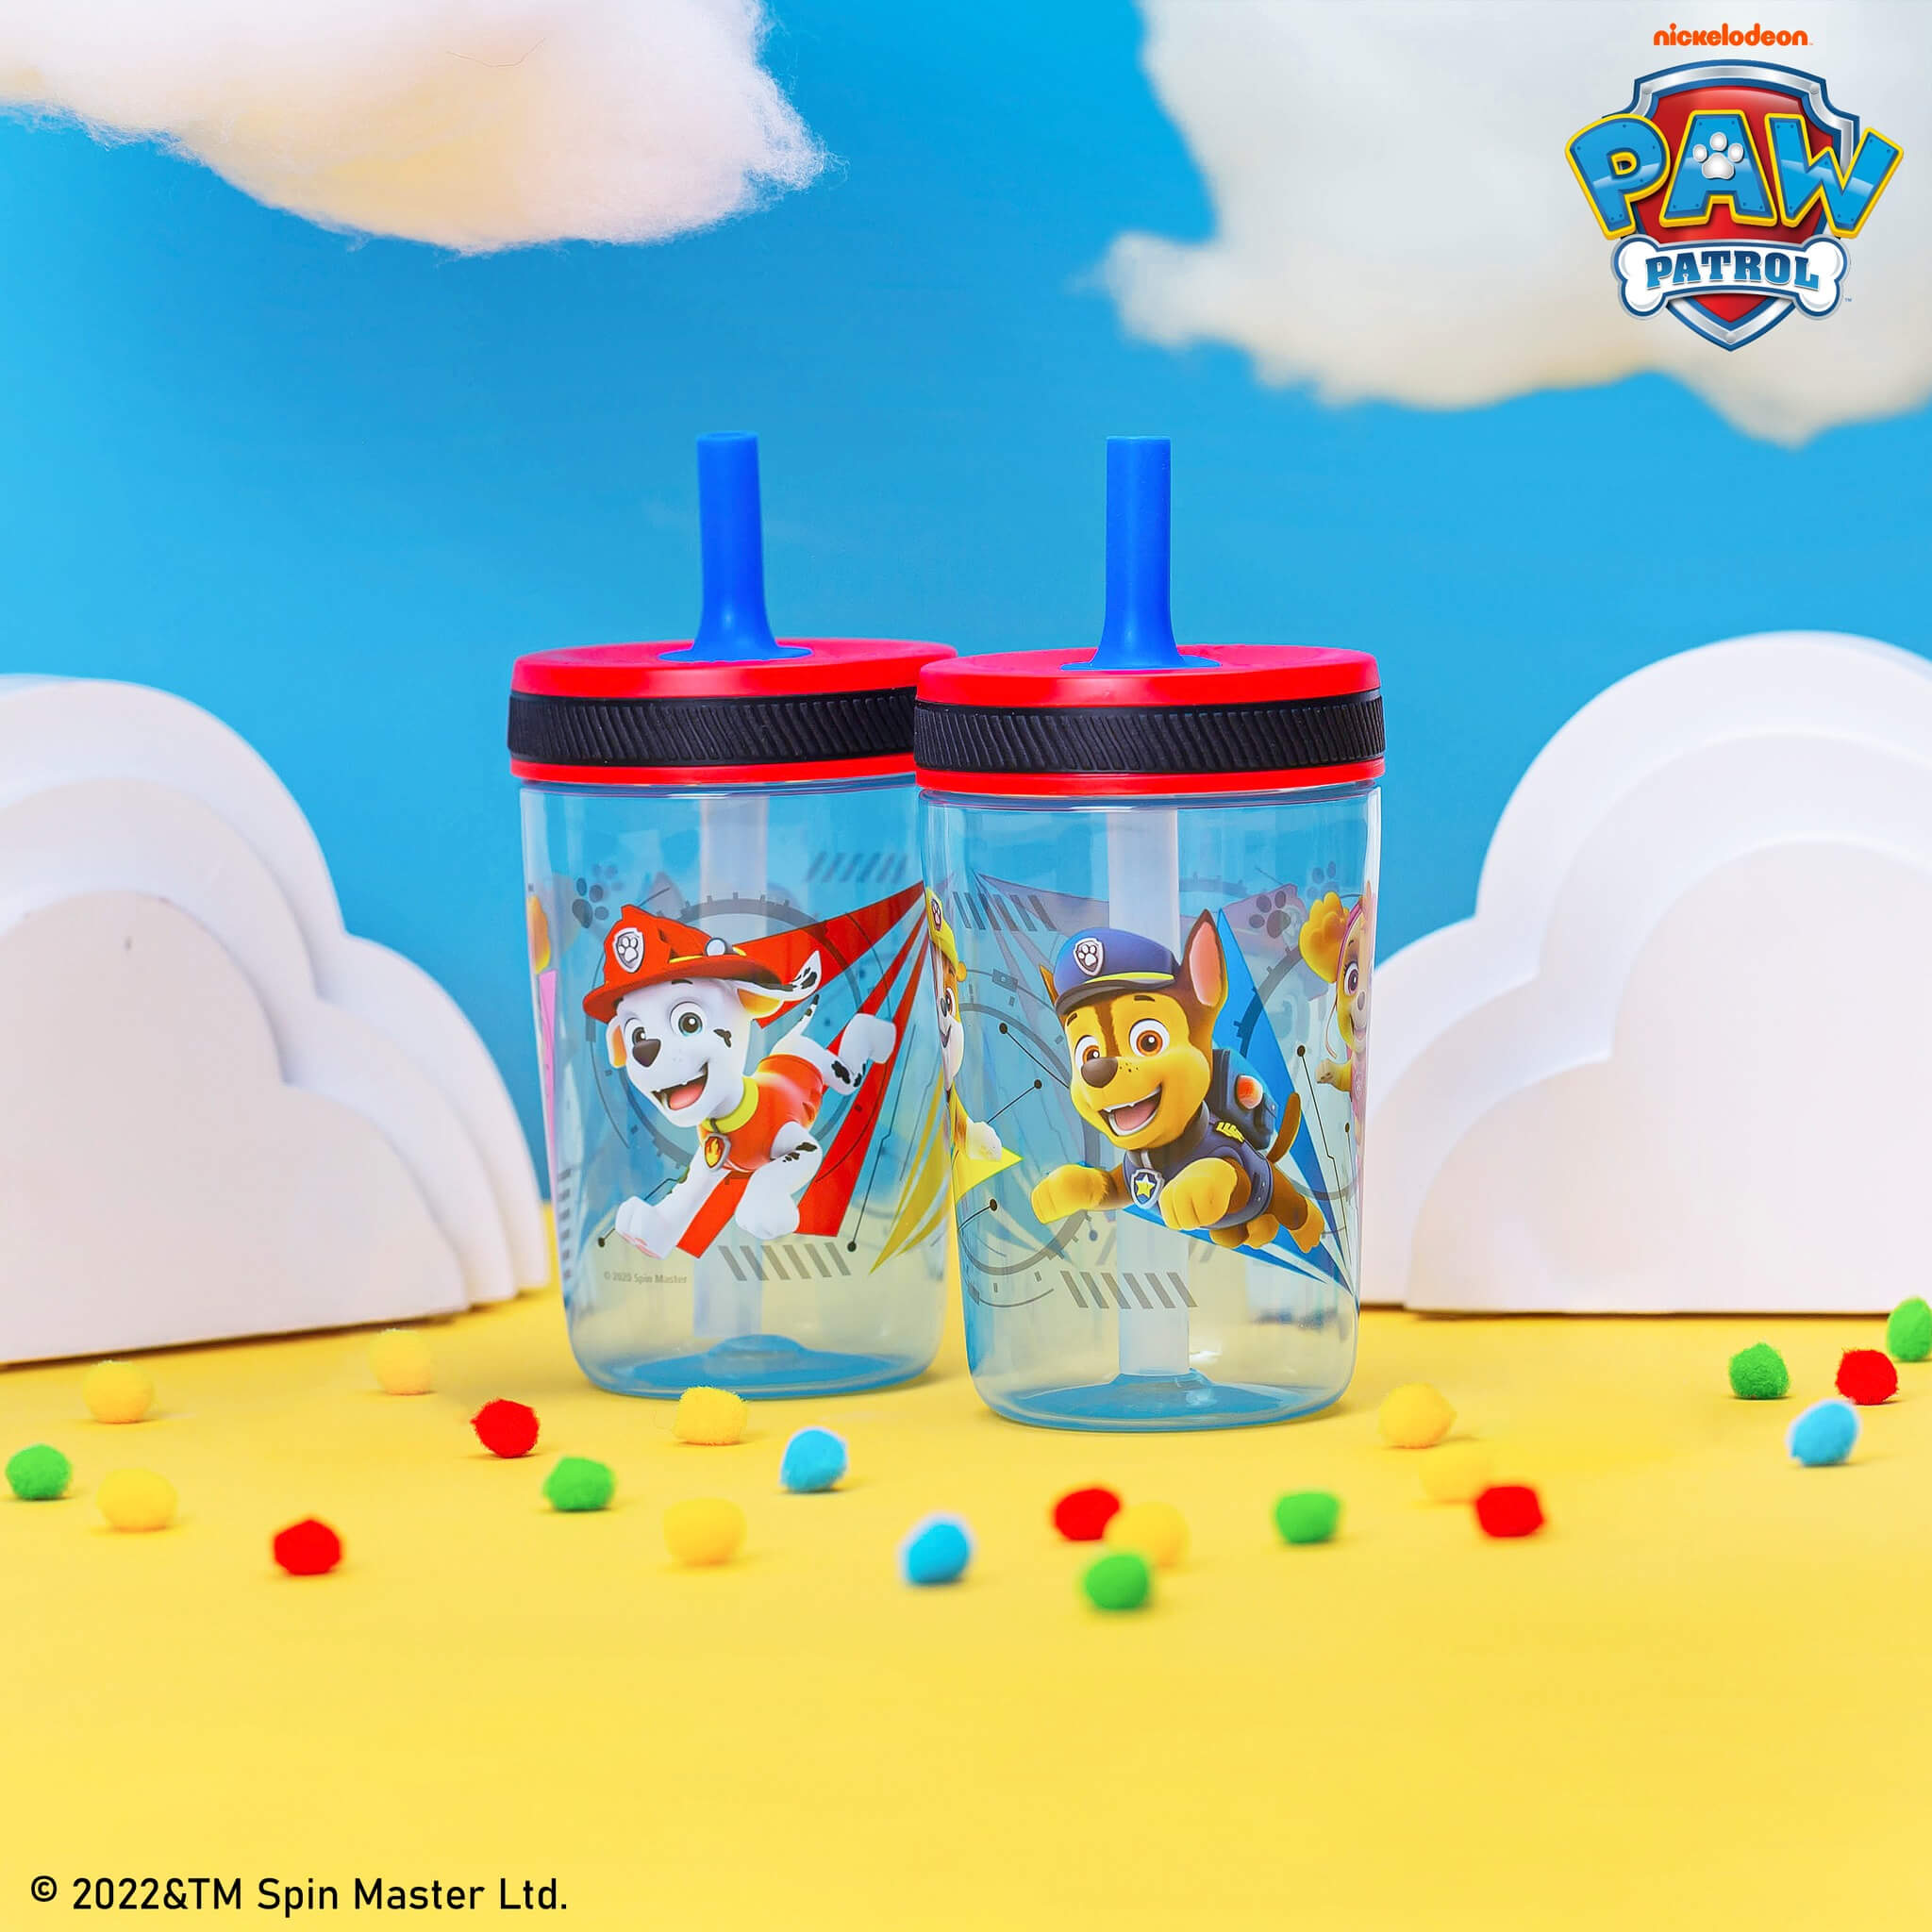 Zak Designs Paw Patrol 18 oz. Plastic Tumbler with Straw and Sculpted Lid,  Chase 